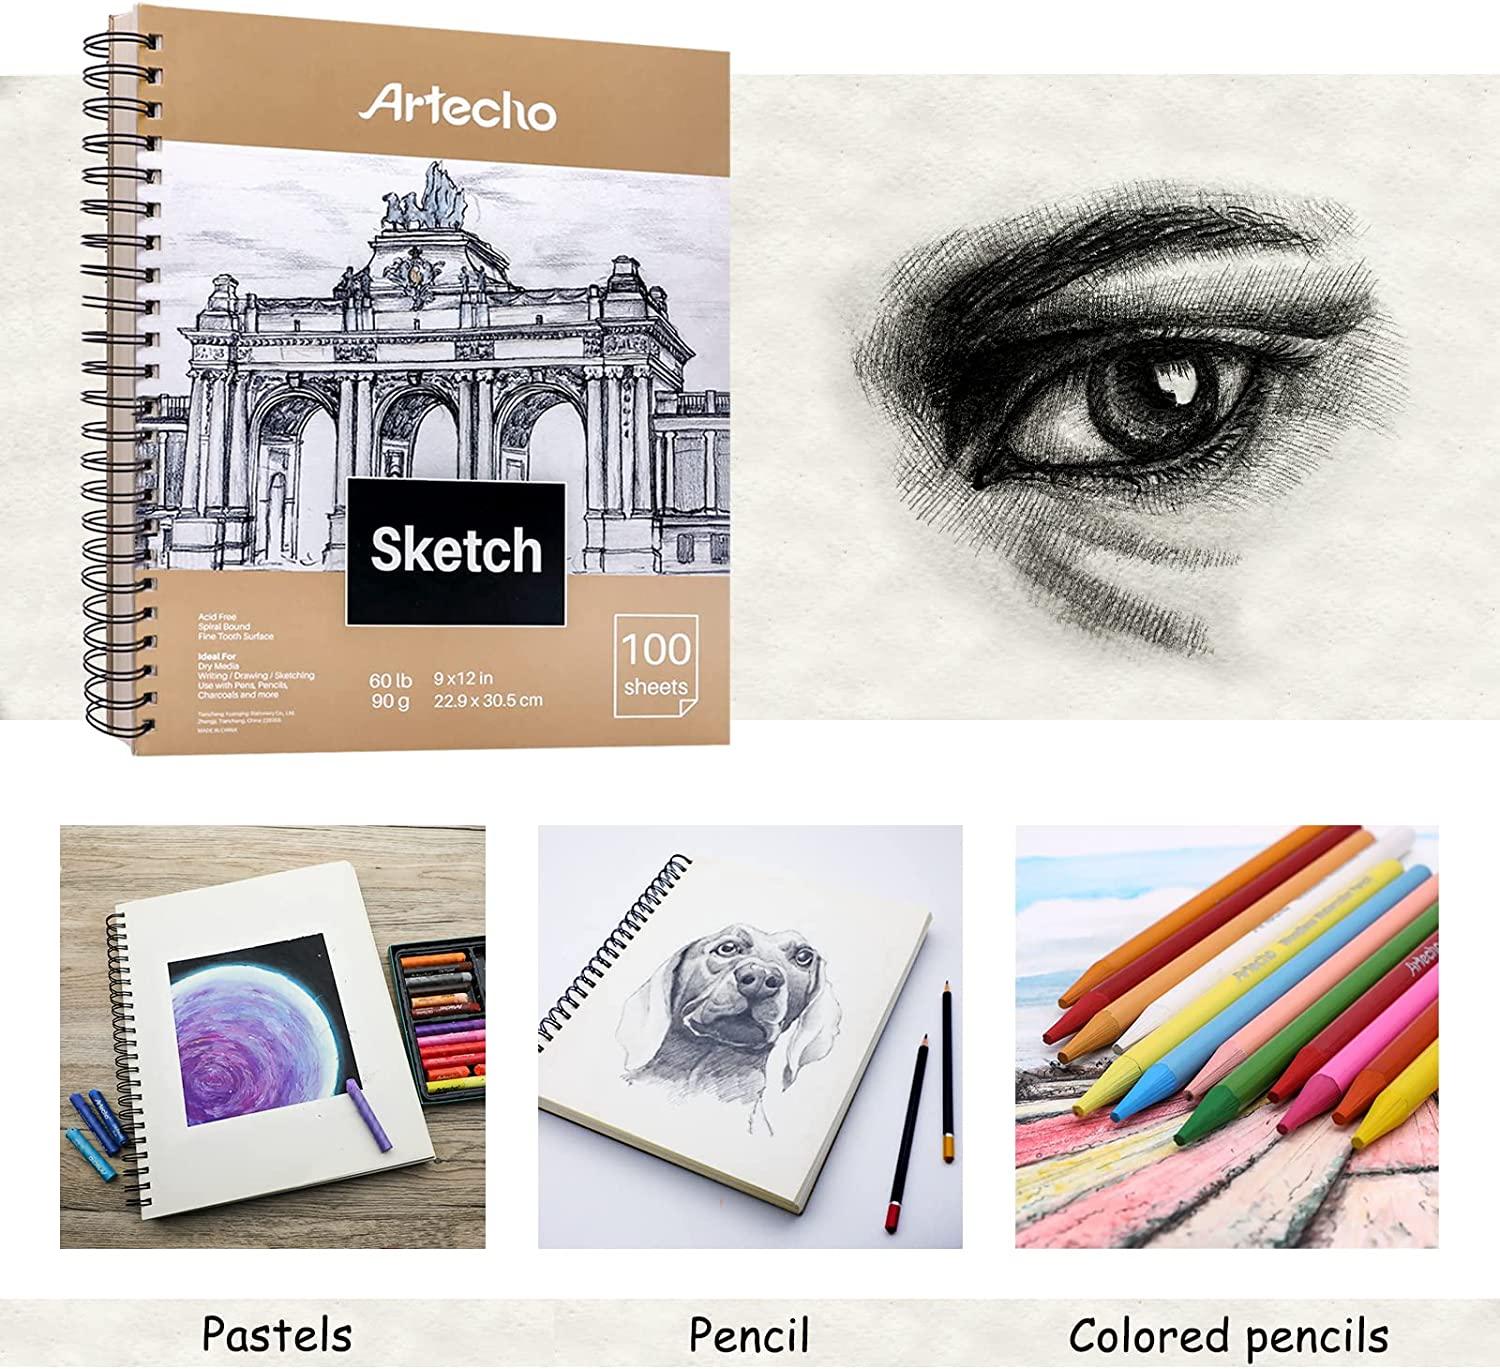 Pro Art Premium Sketch Paper Pad 9x12 100 sheets, 60#, Wire, Sketch Book,  Sketchbook, Drawing Pad, Sketch Pad, Drawing Paper, Art Book, Drawing Book,  Art Paper, Sketchbook for Drawing